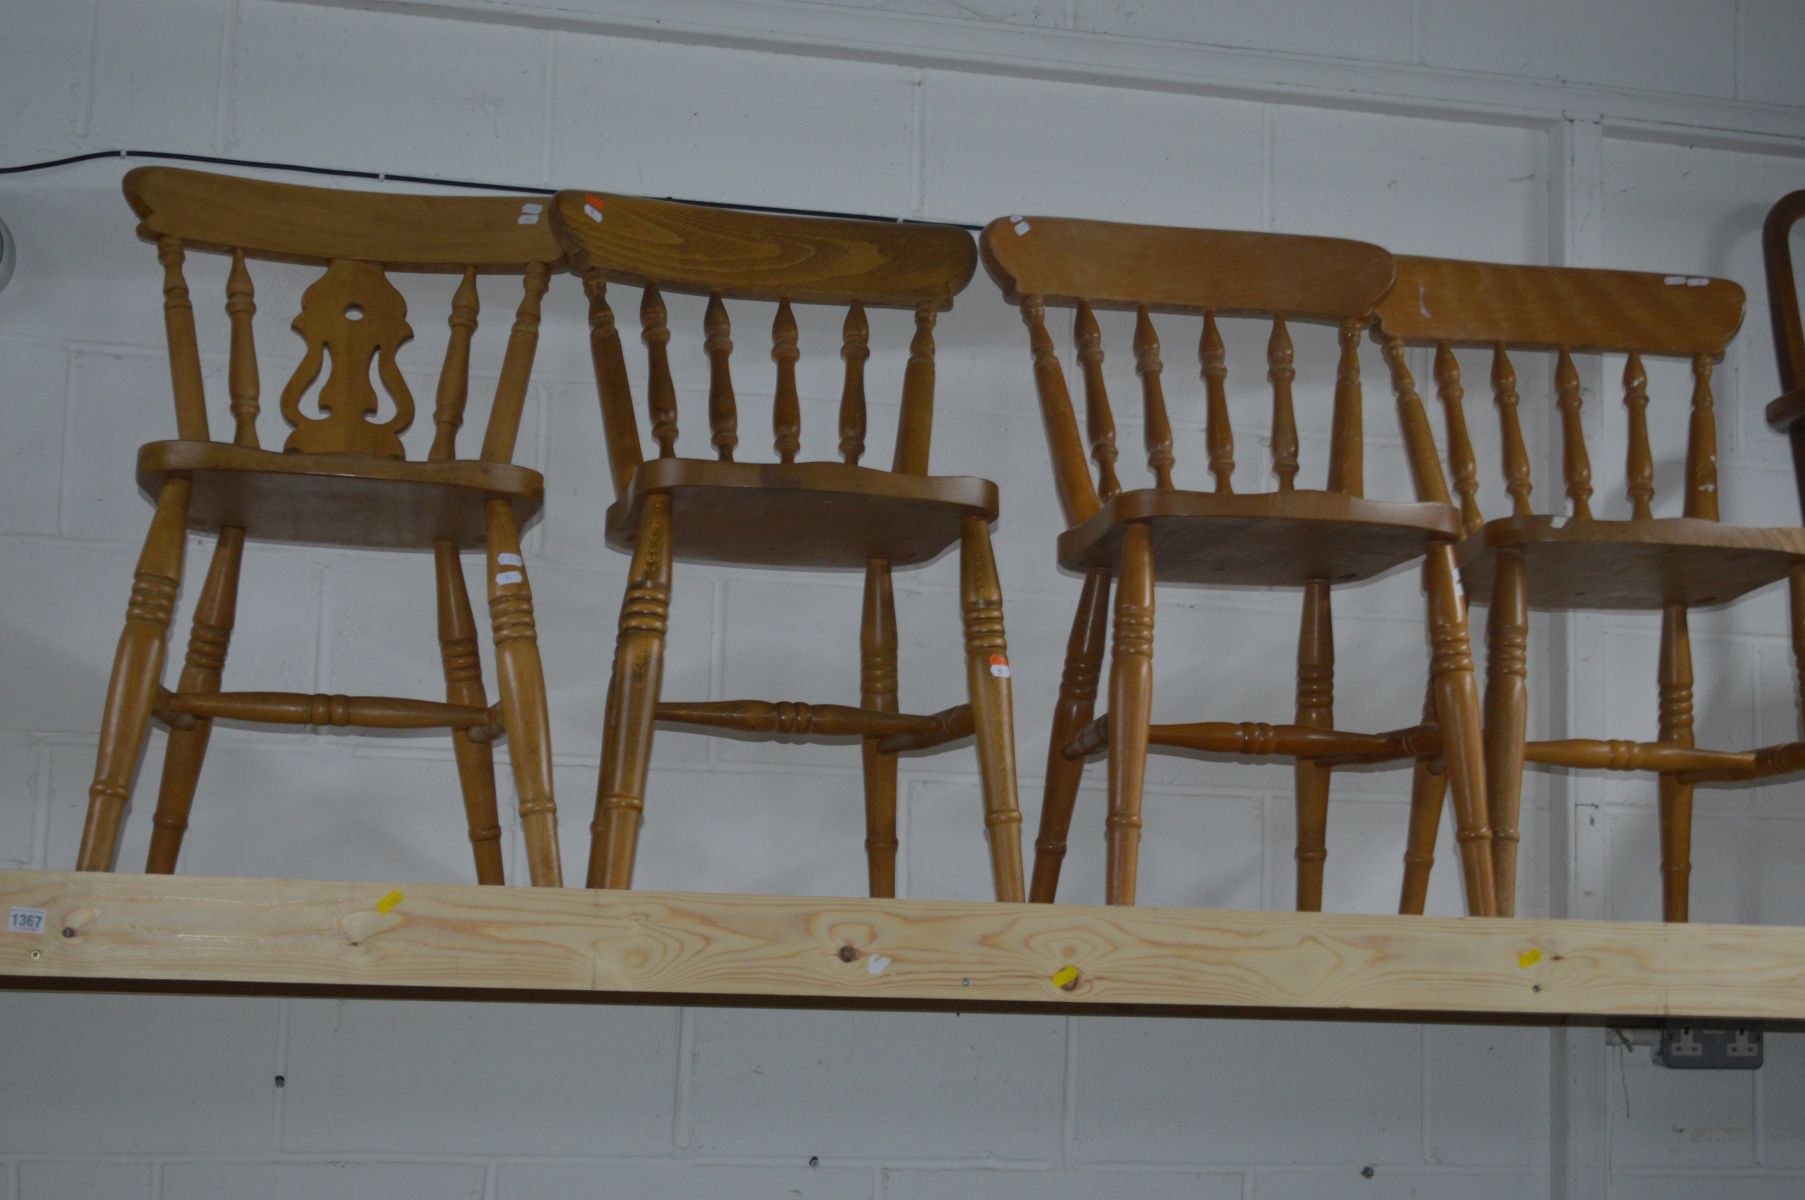 A MATCHED SET OF SEVEN BEECH KITCHEN CHAIRS